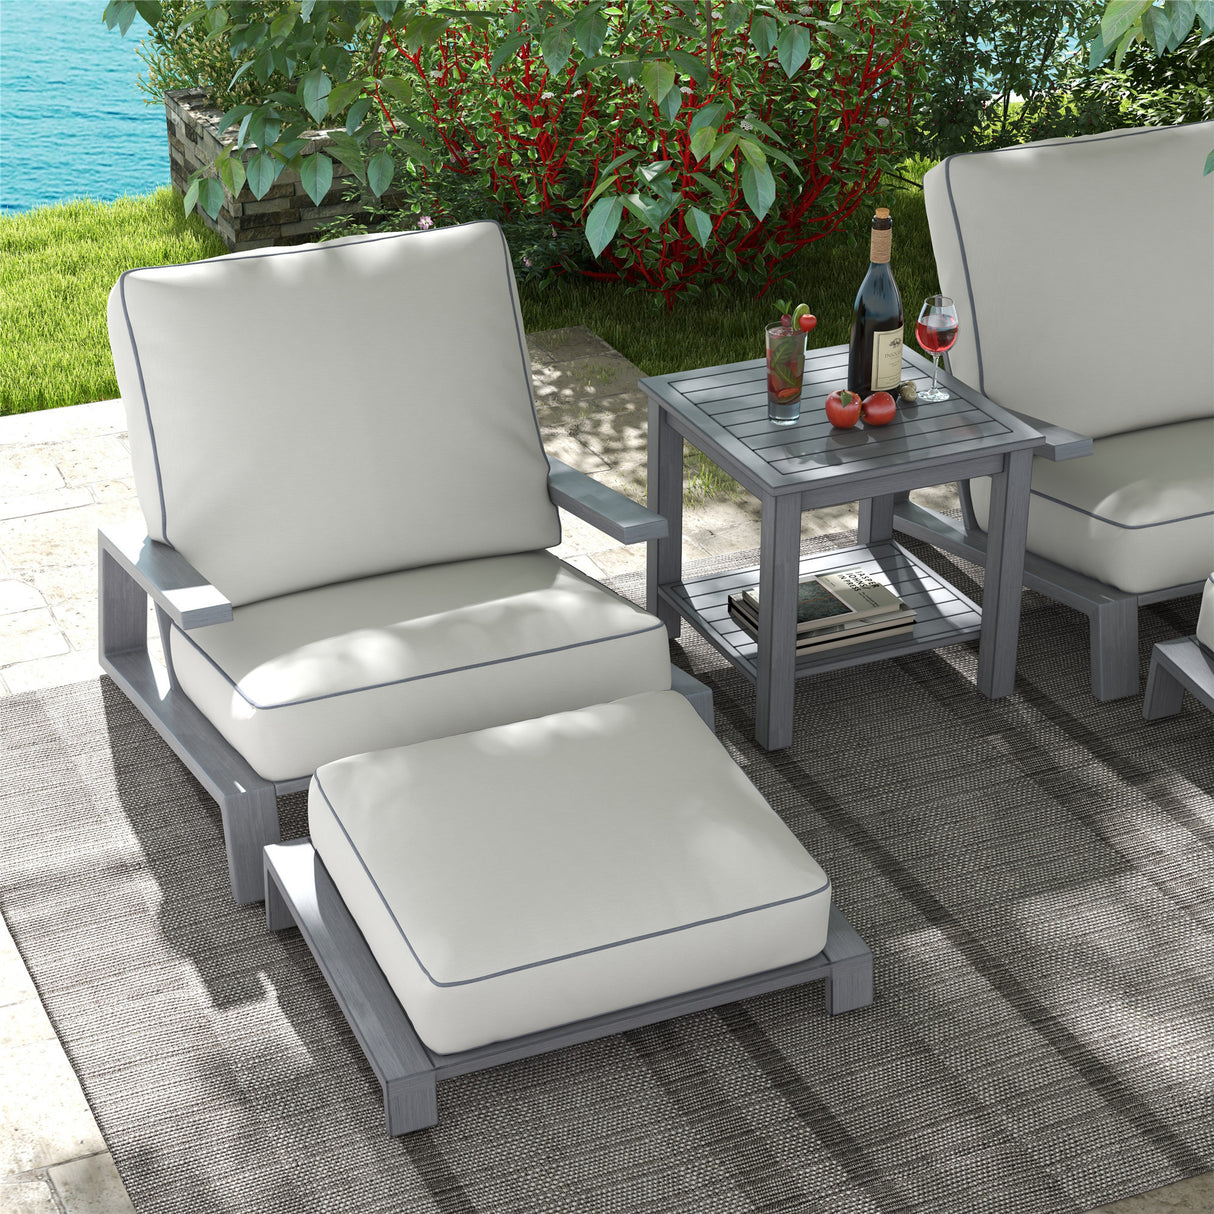 Octavia All-Weather Outdoor, Patio 5-Piece Aluminum Bistro Set with Water-Repellent Cushions for Deck, Backyards, Garden, Lawns, Poolside, and Beach.